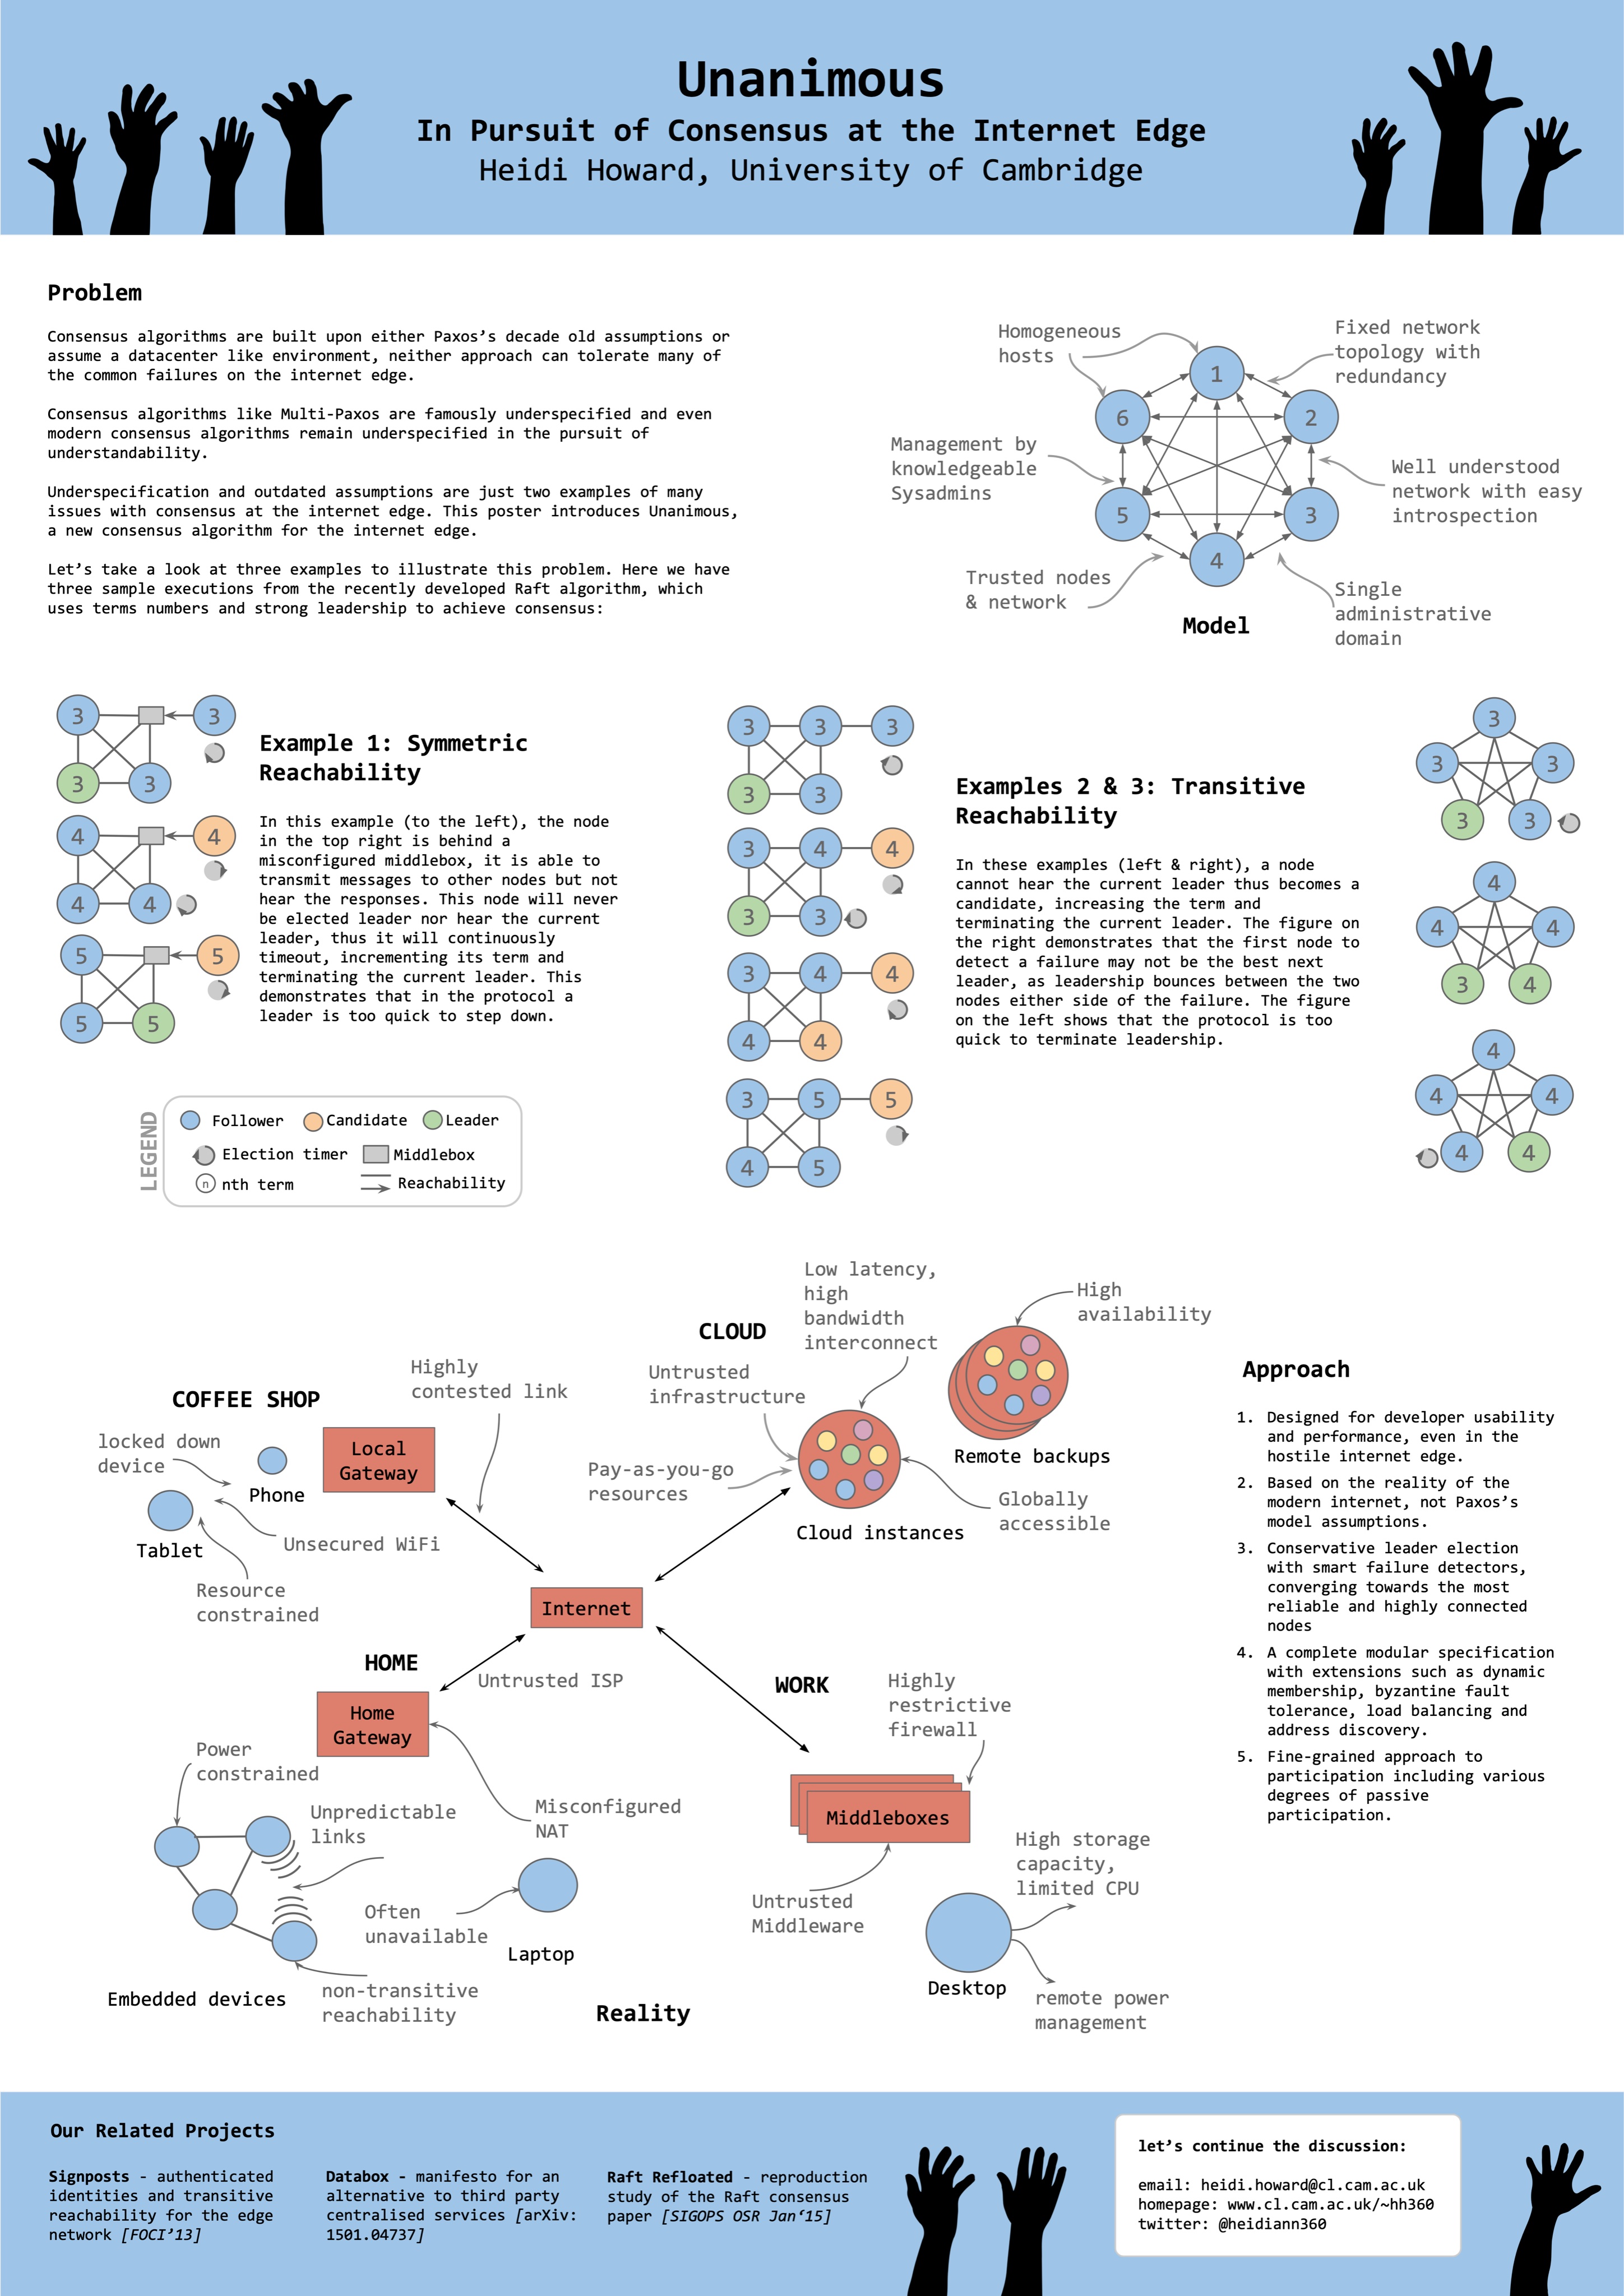 In pursuit of consensus at the Internet Edge − Heidi Howard's Poster